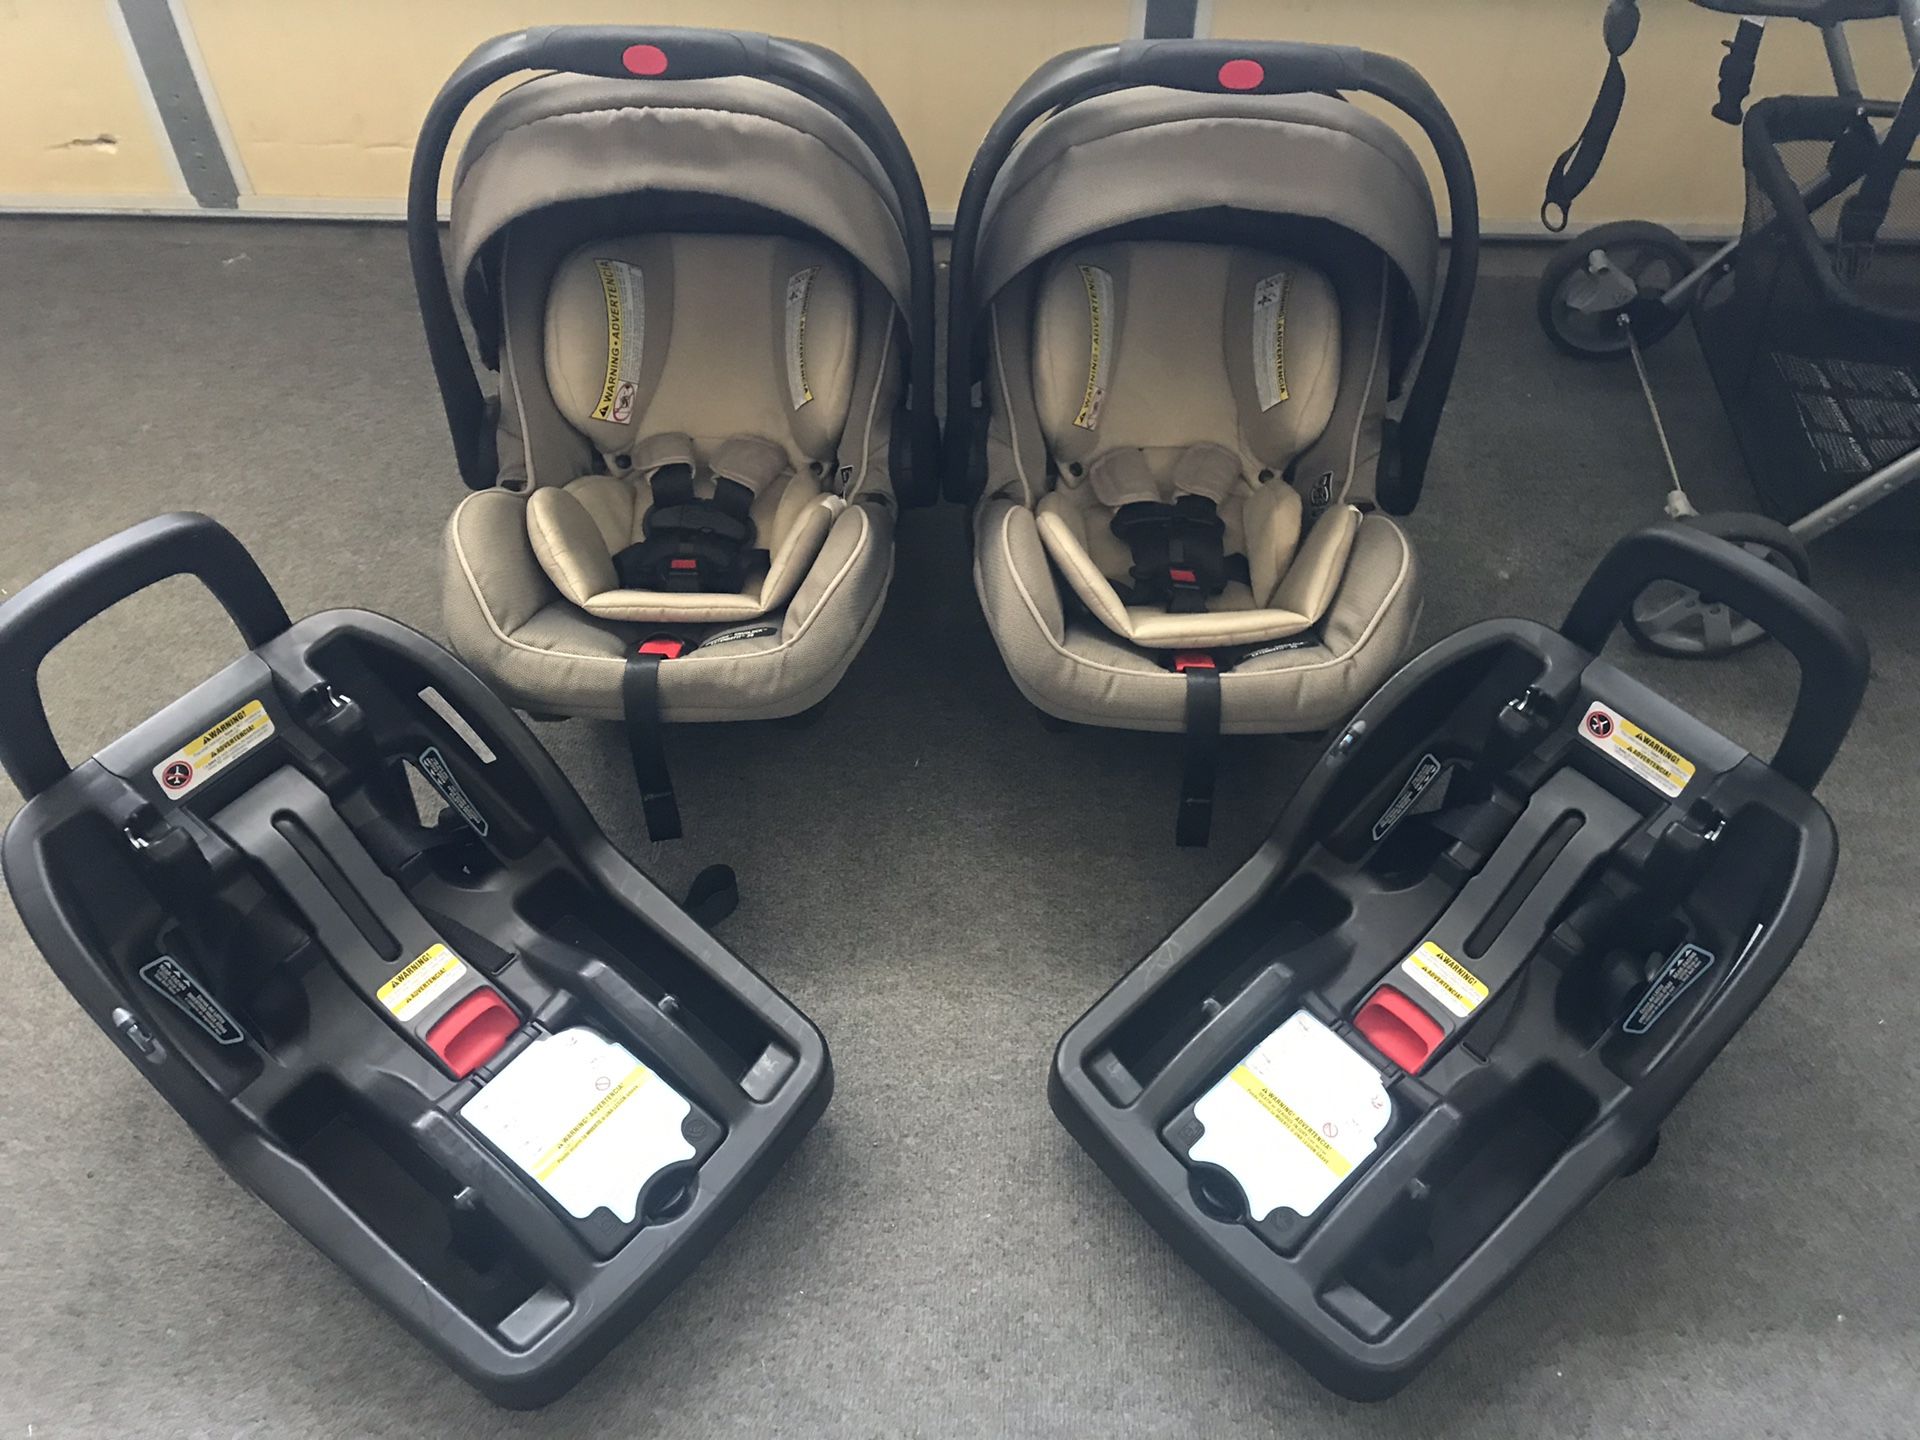 Graco Snugride extend to fit Click Connect infant car seats plus bases and baby trend twin stroller